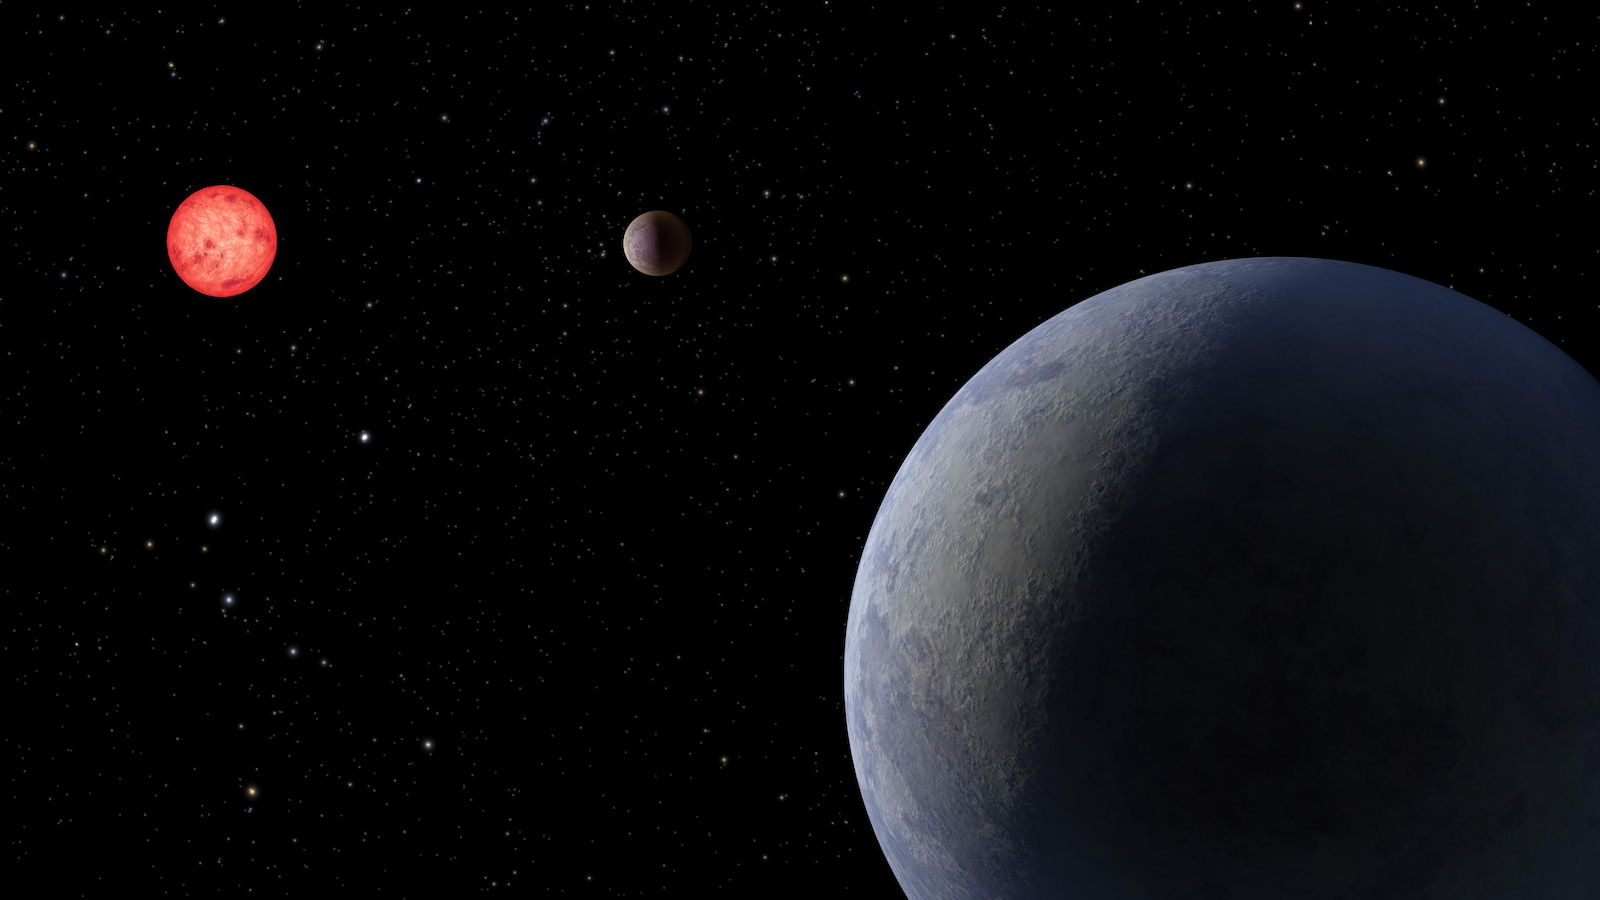 slide 4 - Illustration showing a super-Earth, LP 890-9 c, in the foreground, its sister planet LP 890-9 b farther away, both orbiting a red-dwarf star.